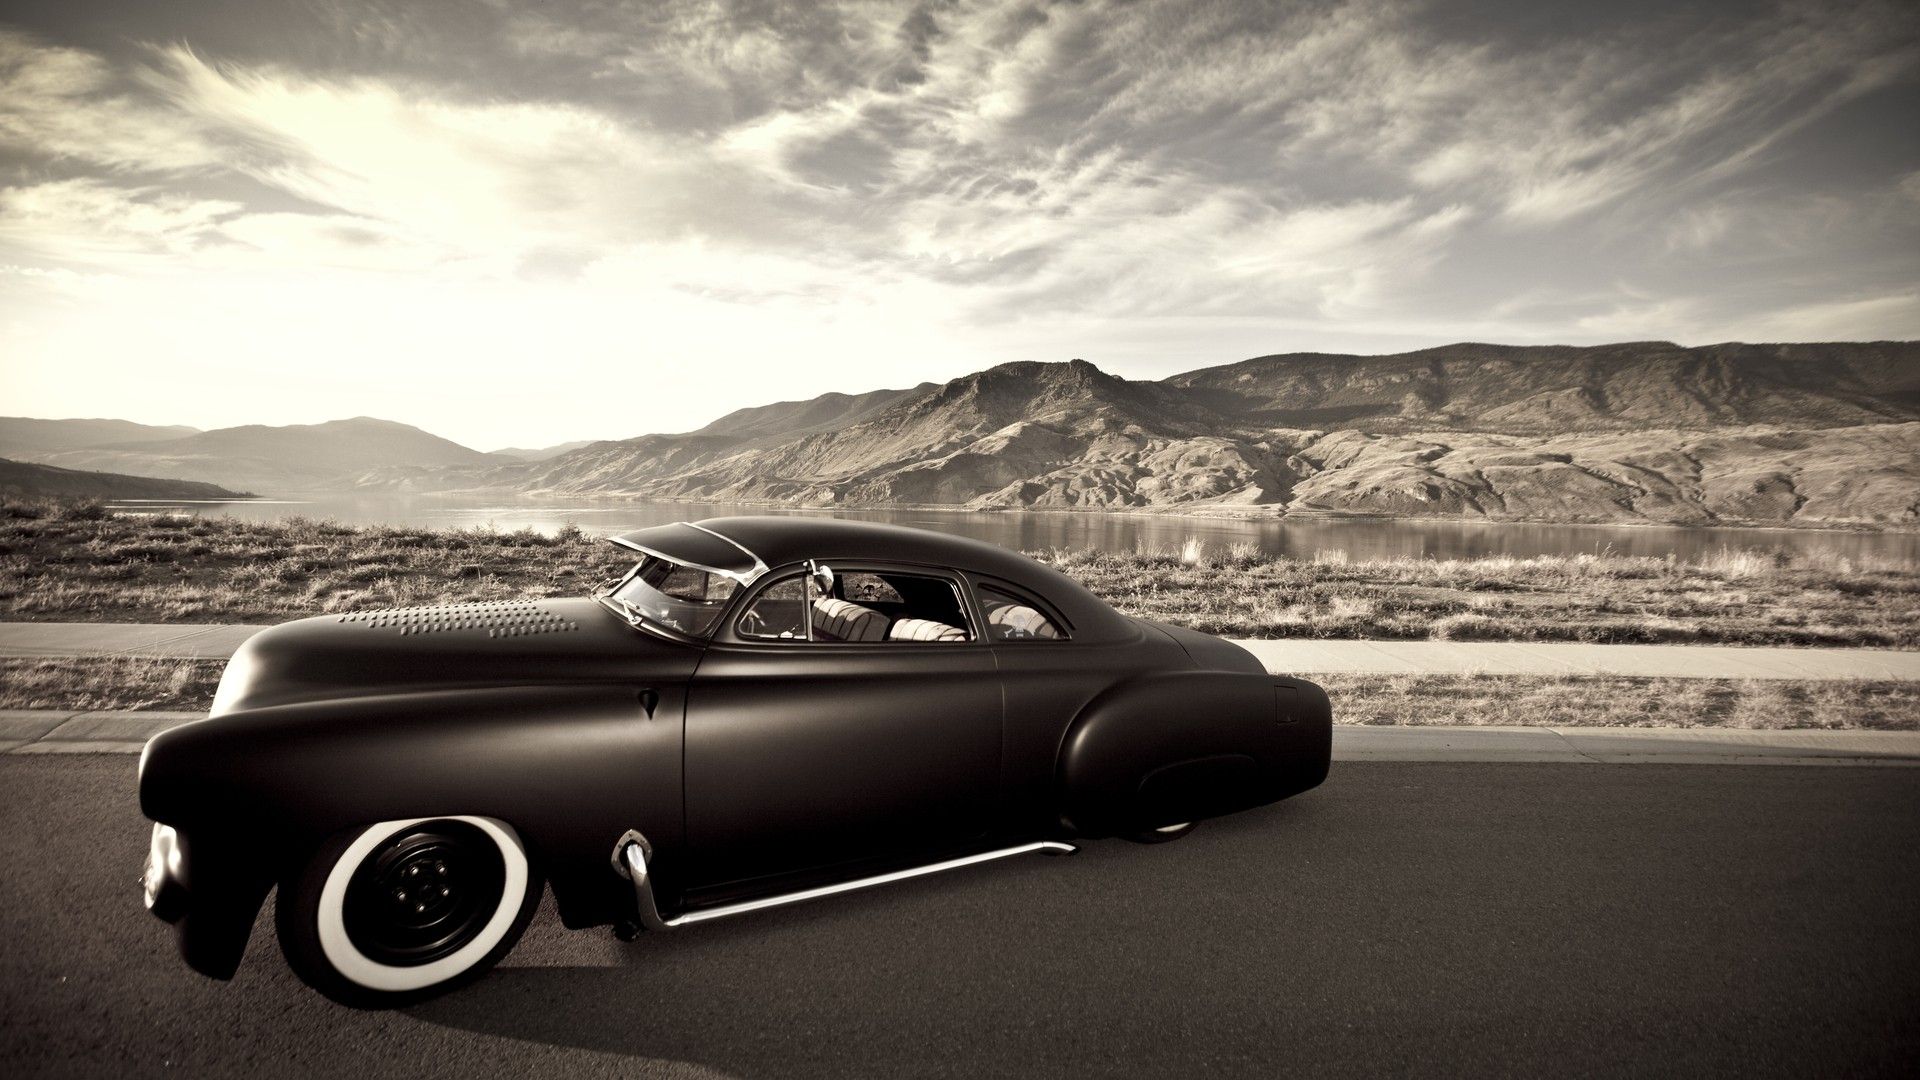 Hot Rods Wallpapers 62 images